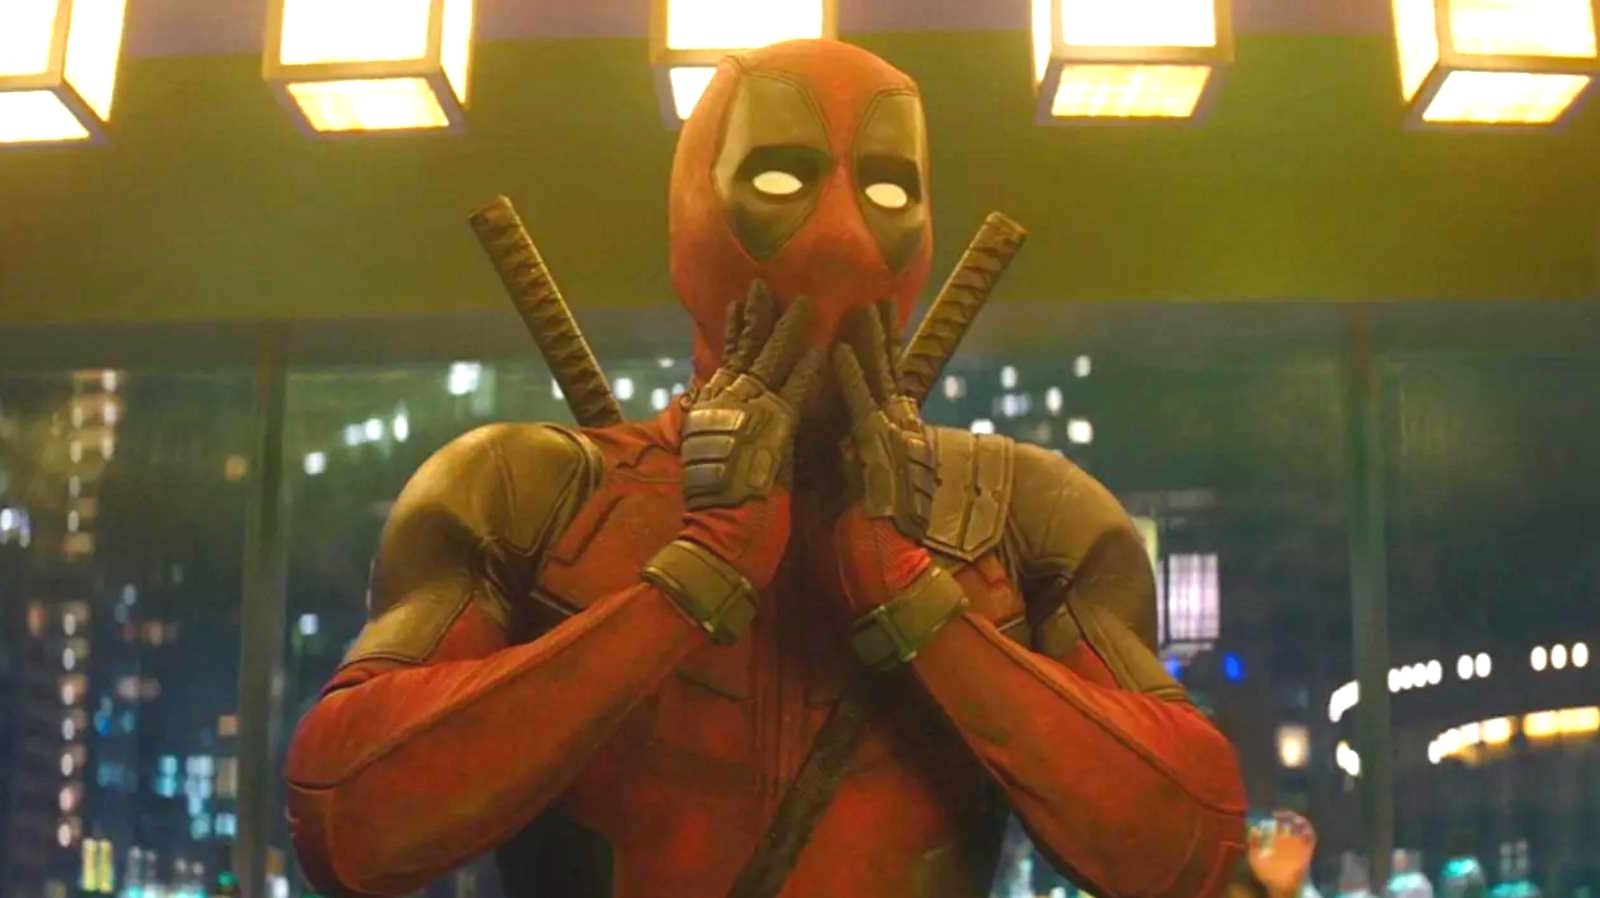 New Deadpool 3 Set Photos Reveal Connections to Loki and Fantastic Four